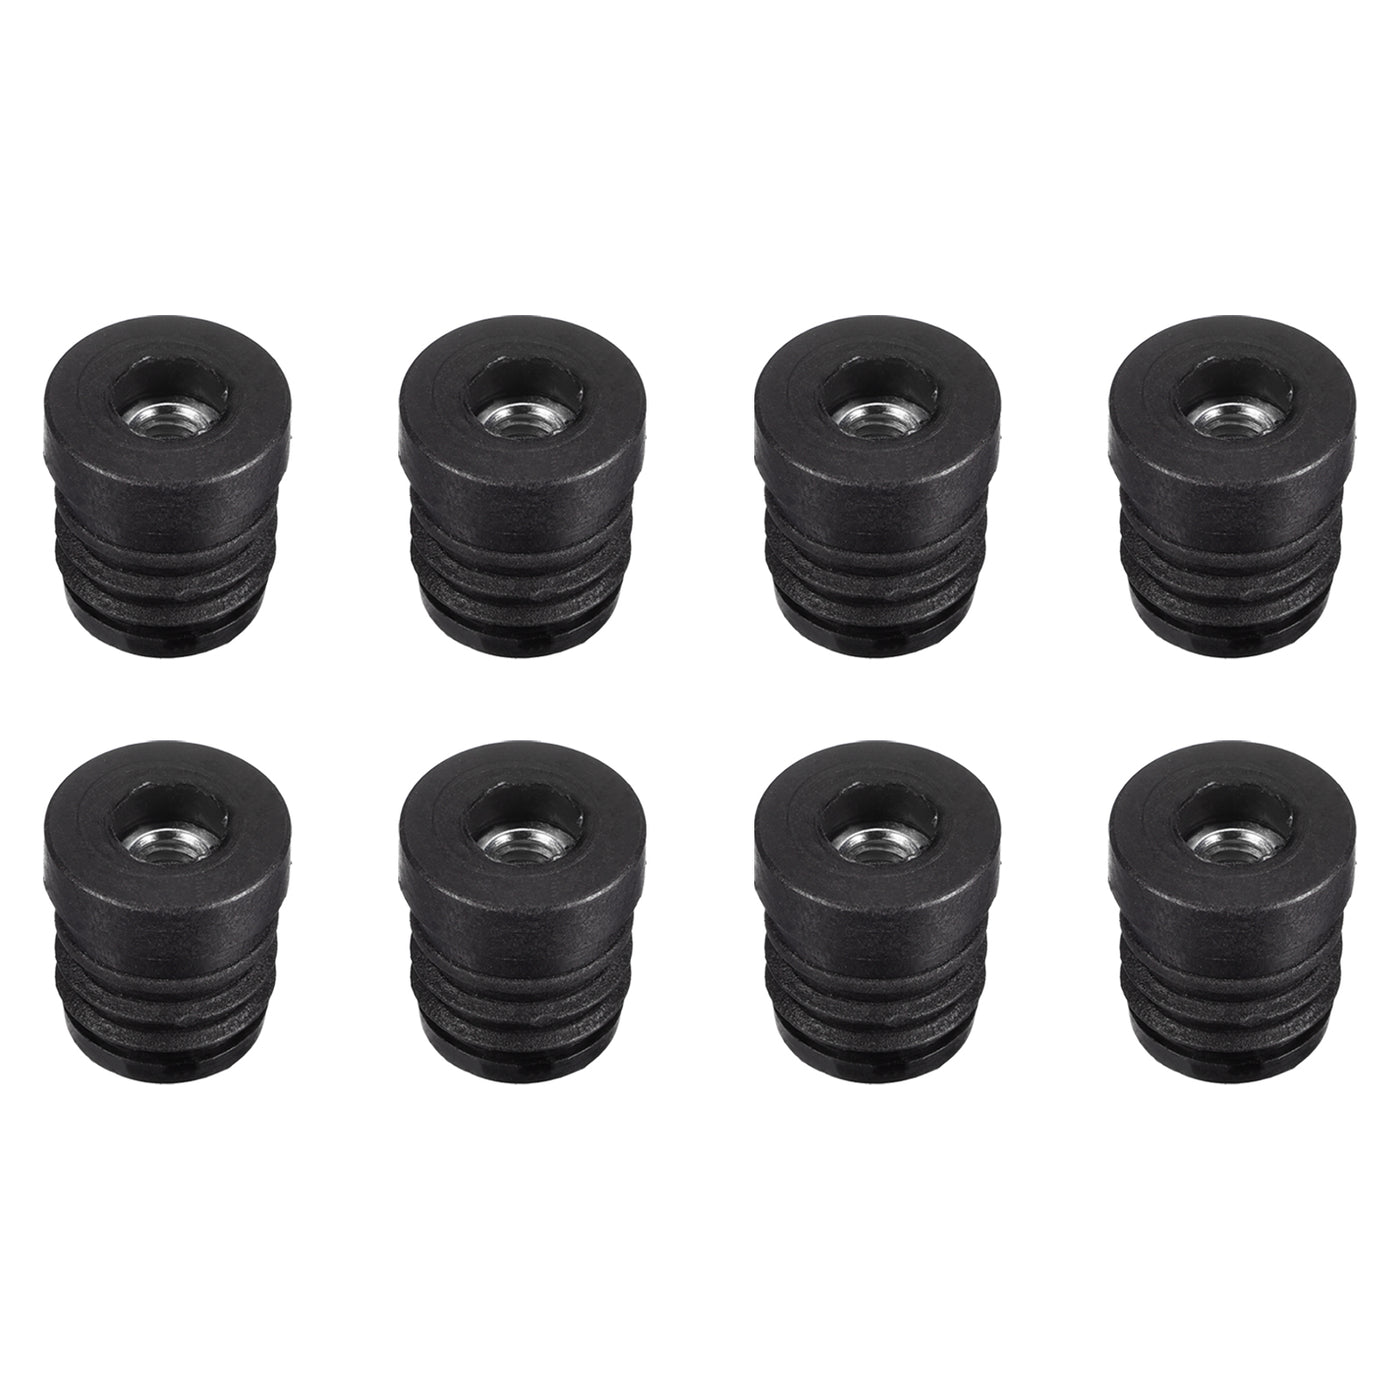 uxcell Uxcell 8Pcs 19mm/0.75" Caster Insert with Thread, Round M6 Thread for Furniture